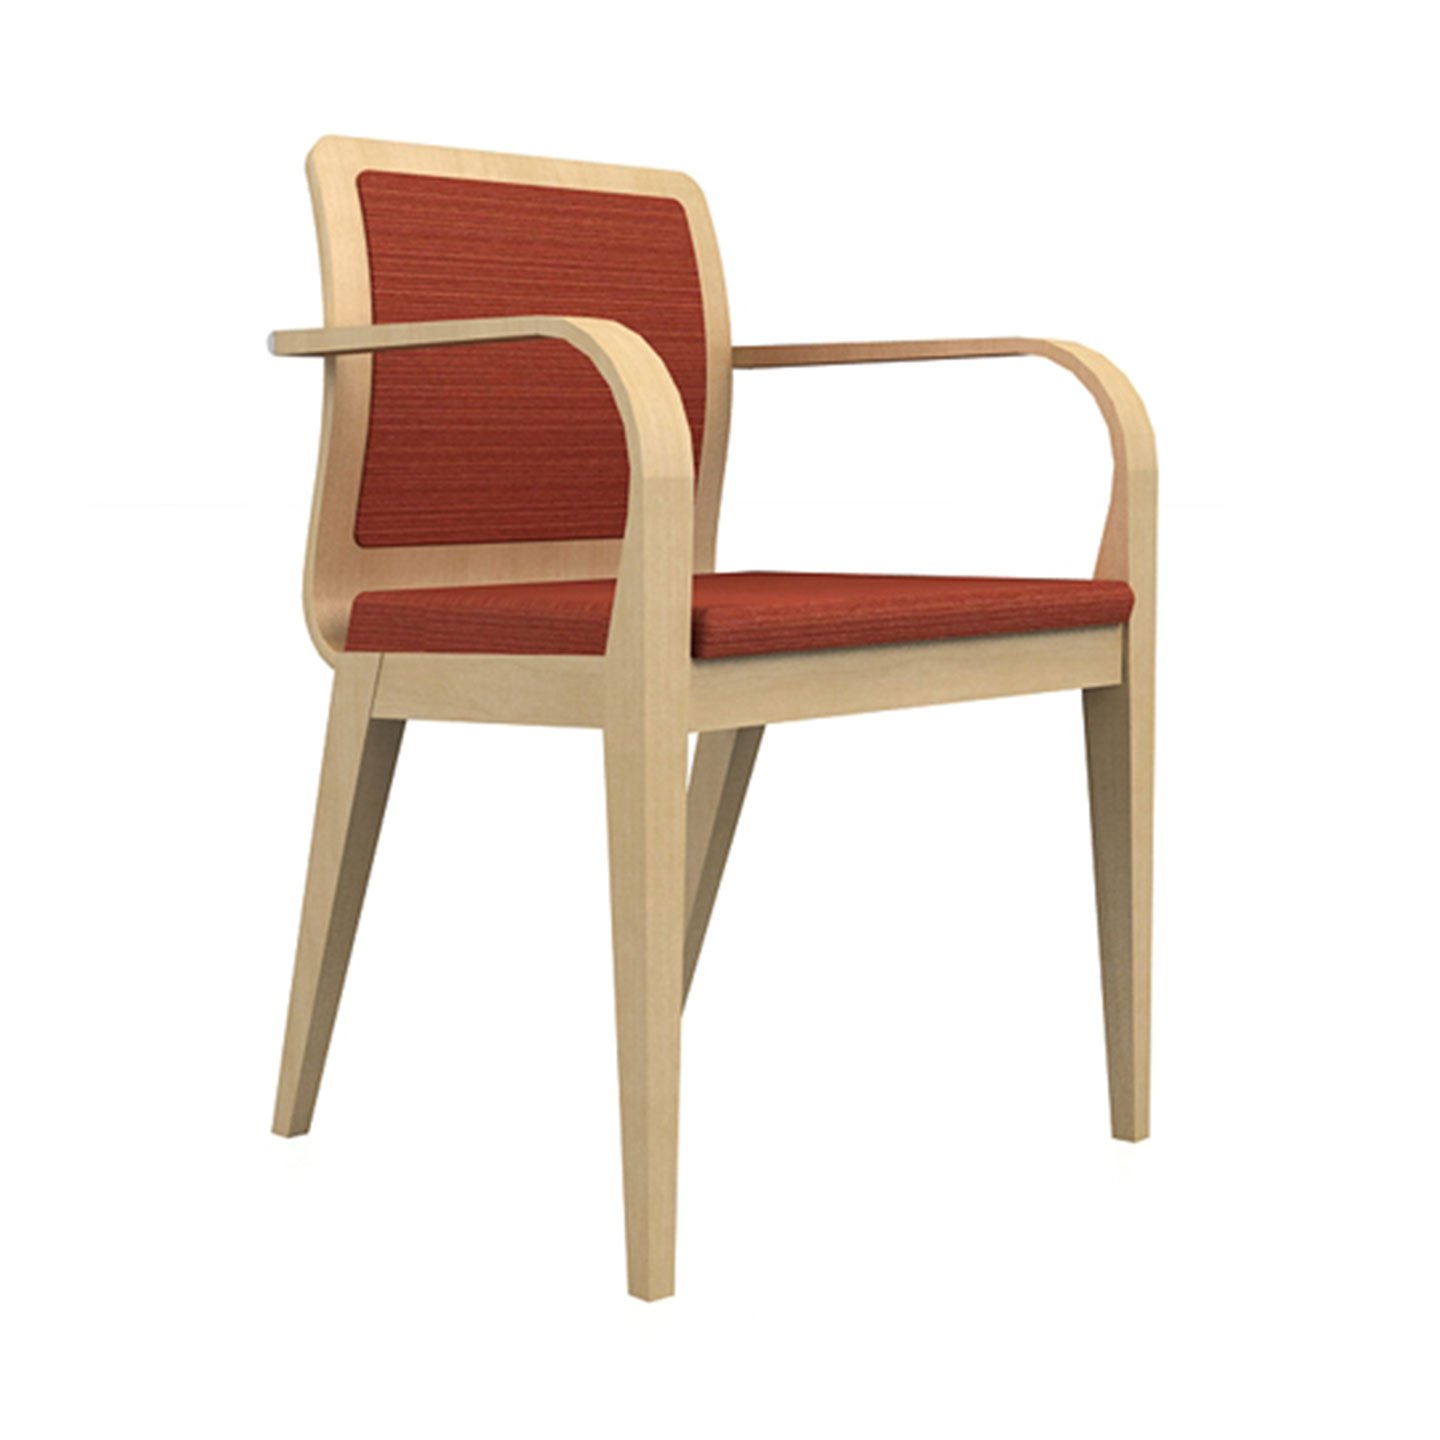 Haworth Hello side chair with red fabric upholstery and light wood frame in a side view